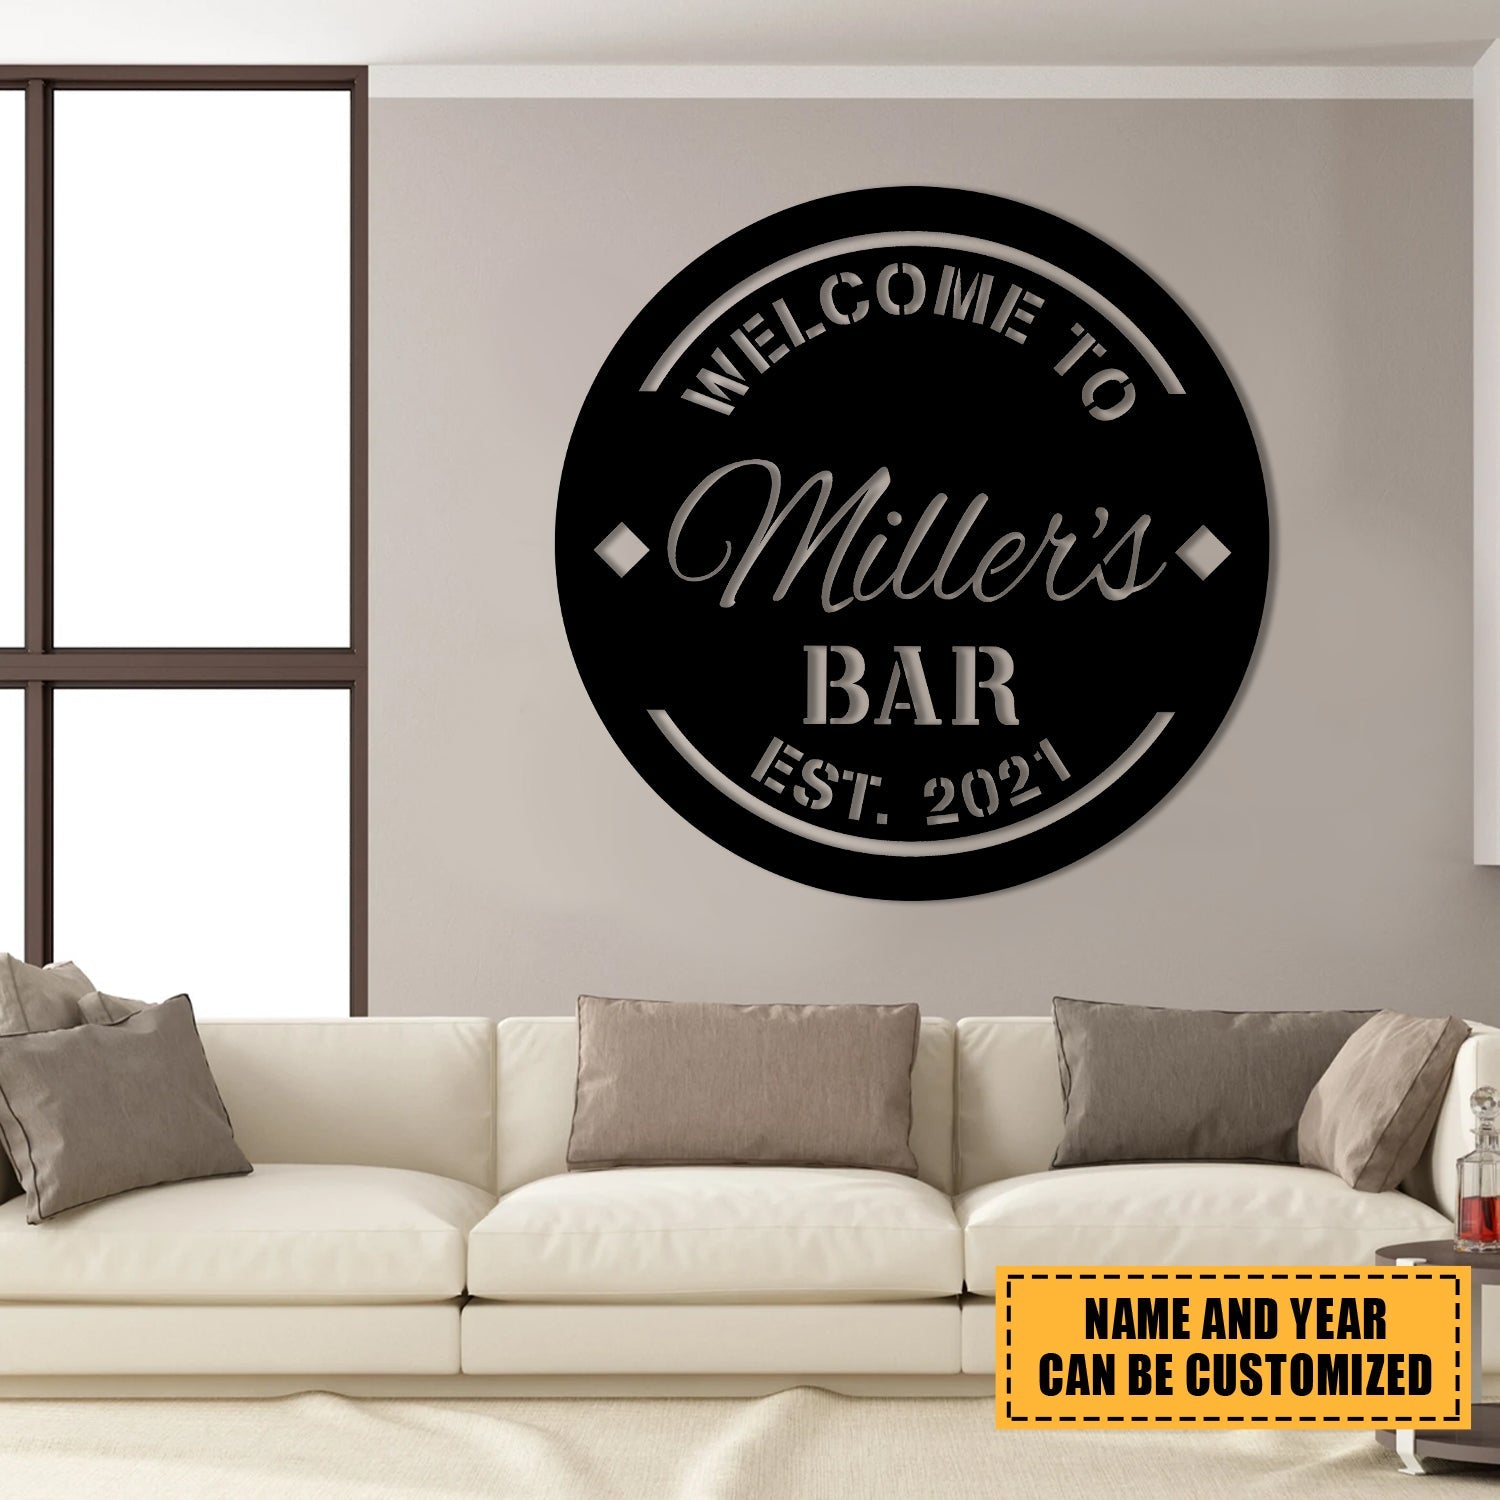 Personalized Metal Bar Sign, Custom Pub, Lounge, Cafe, Home Wall Decor